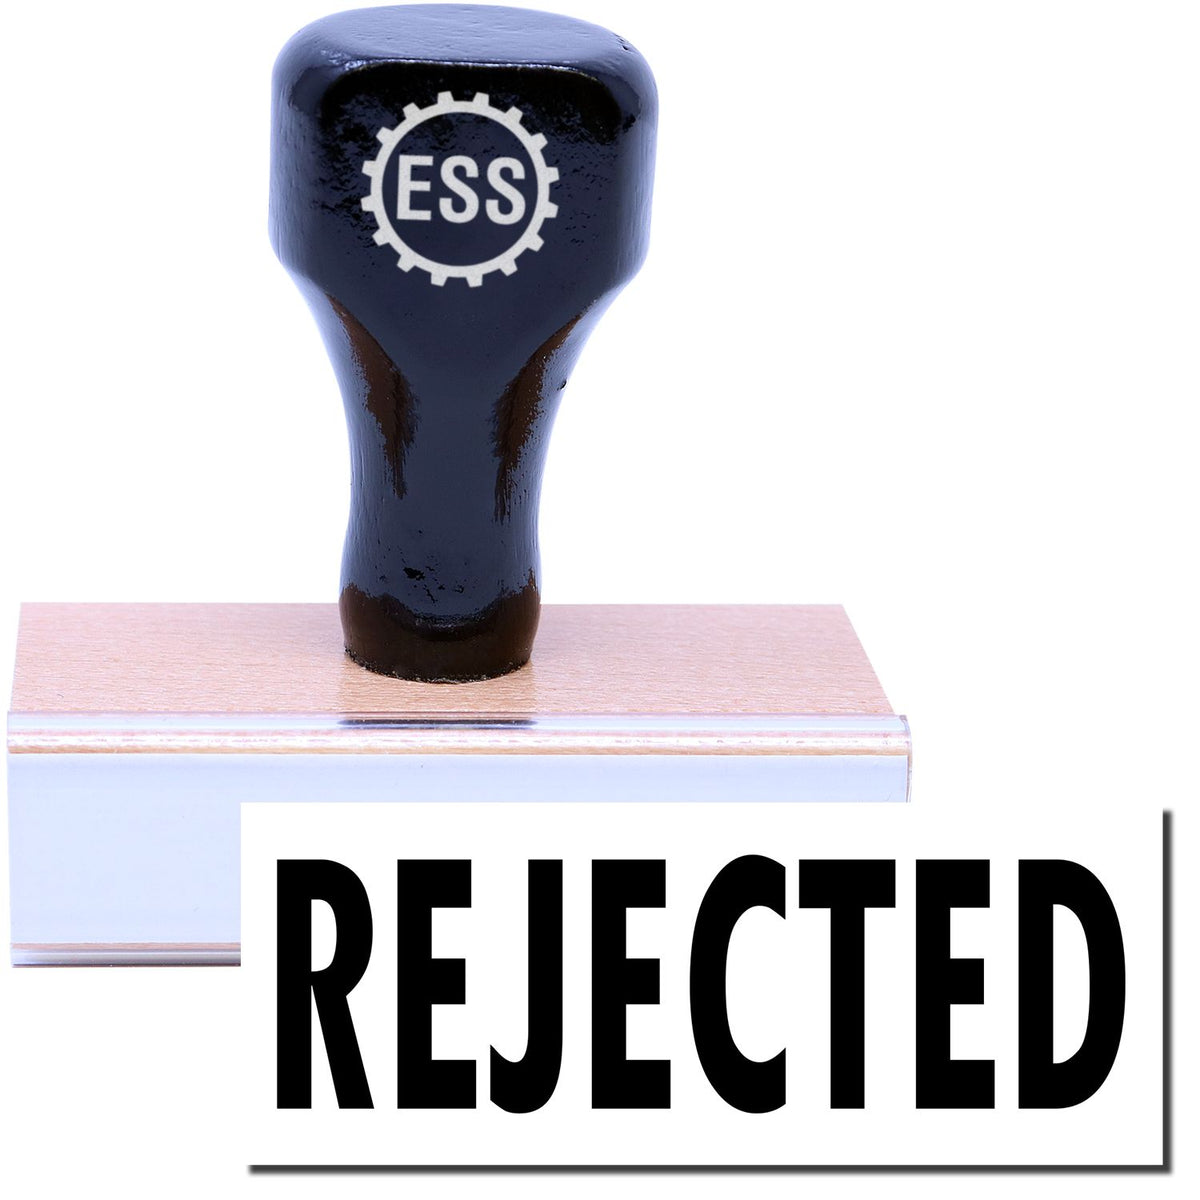 A stock office rubber stamp with a stamped image showing how the text &quot;REJECTED&quot; is displayed after stamping.